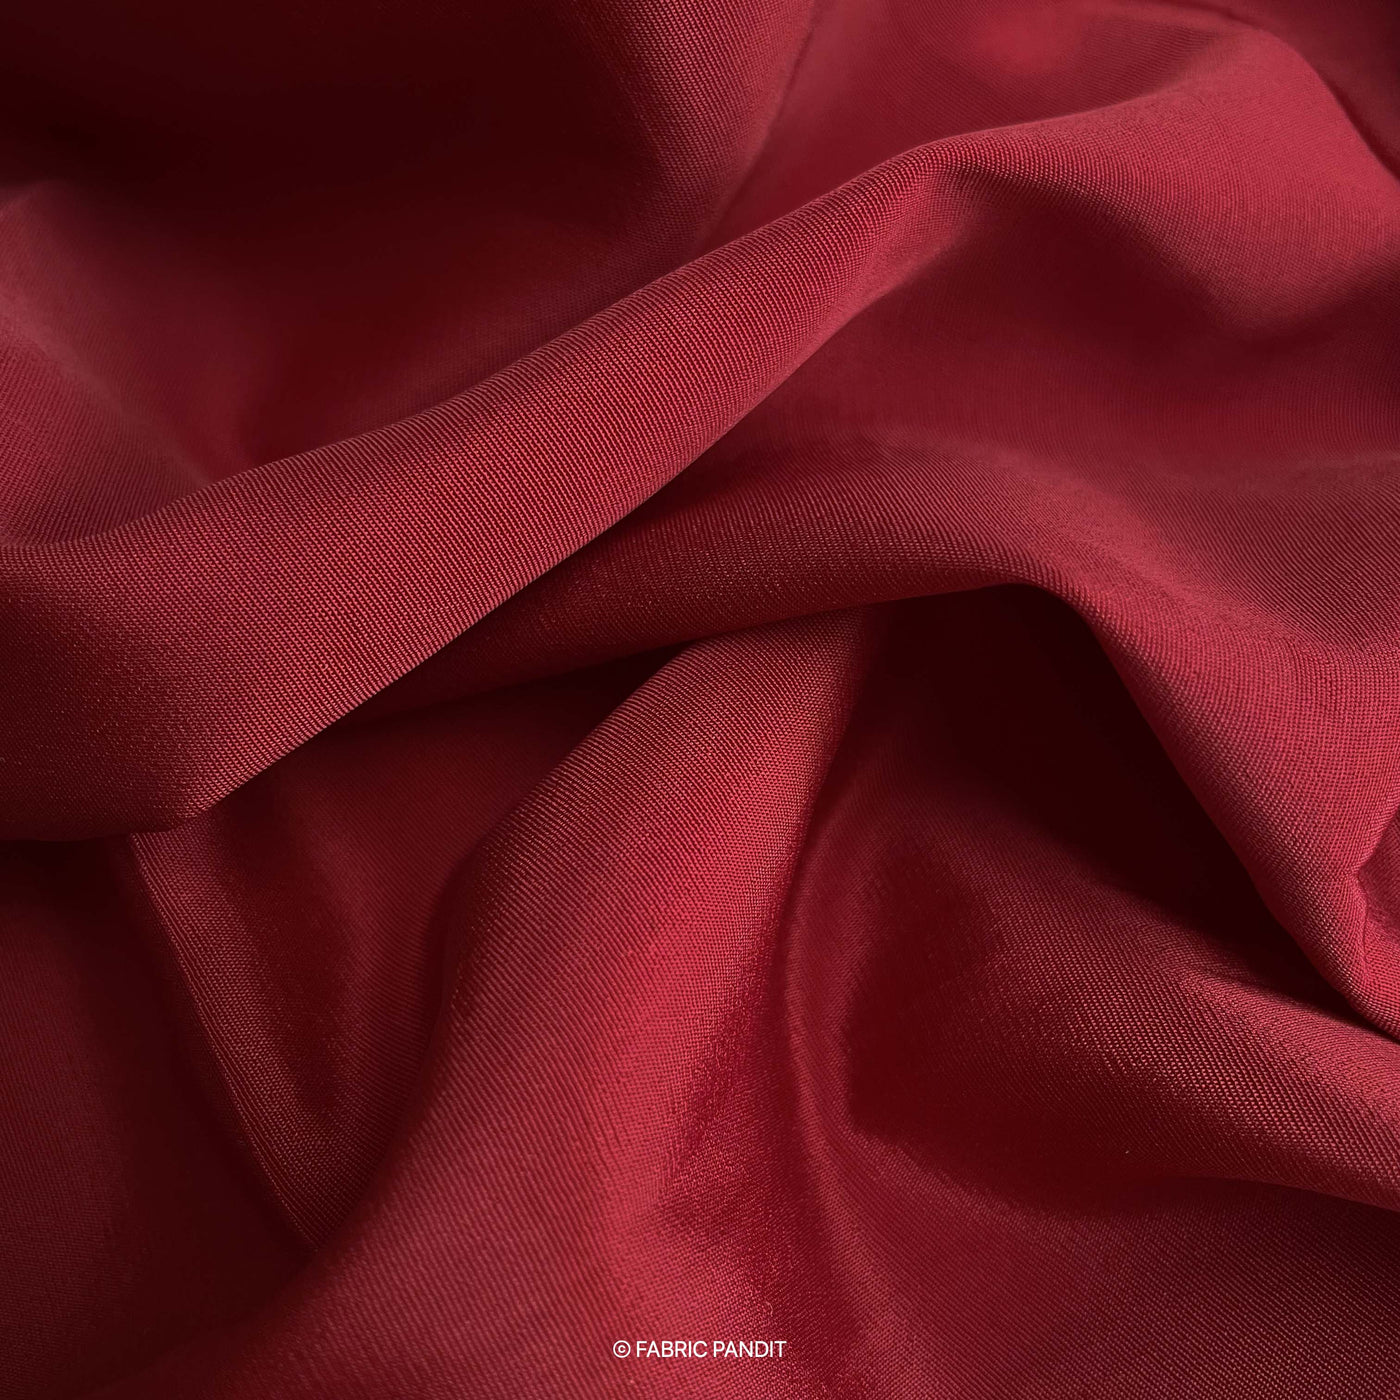 Fabric Pandit Cut Piece (CUT PIECE) Maroon Color Premium French Crepe Fabric (Width 44 inches)